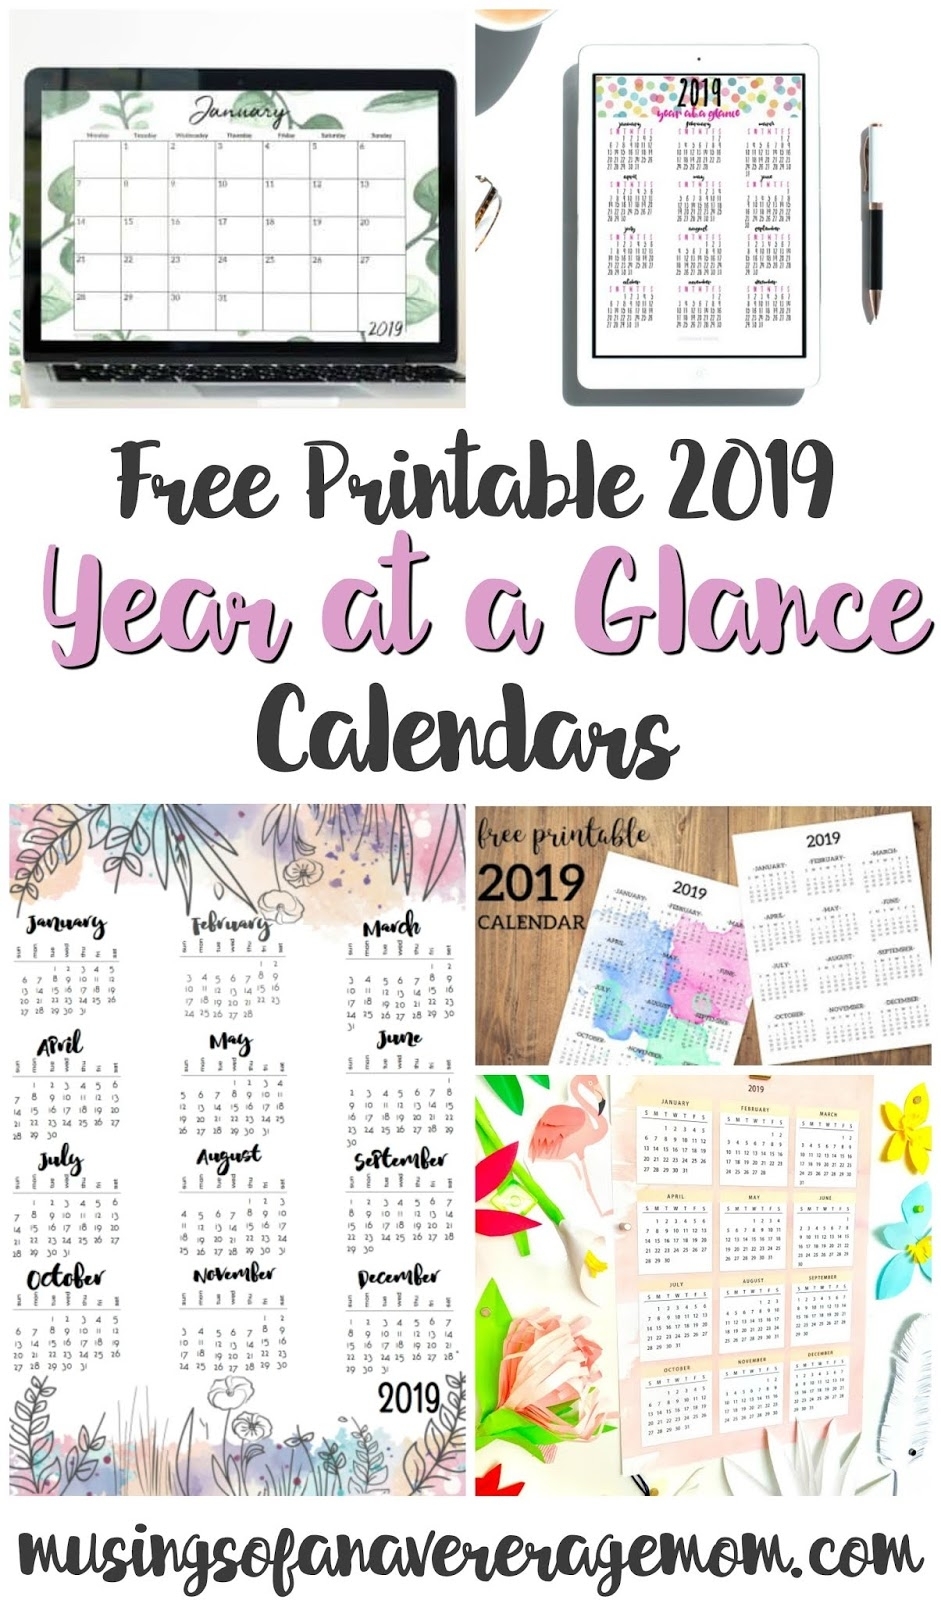 Musings Of An Average Mom: 2019 Year At A Glance regarding Year At A Glance Free